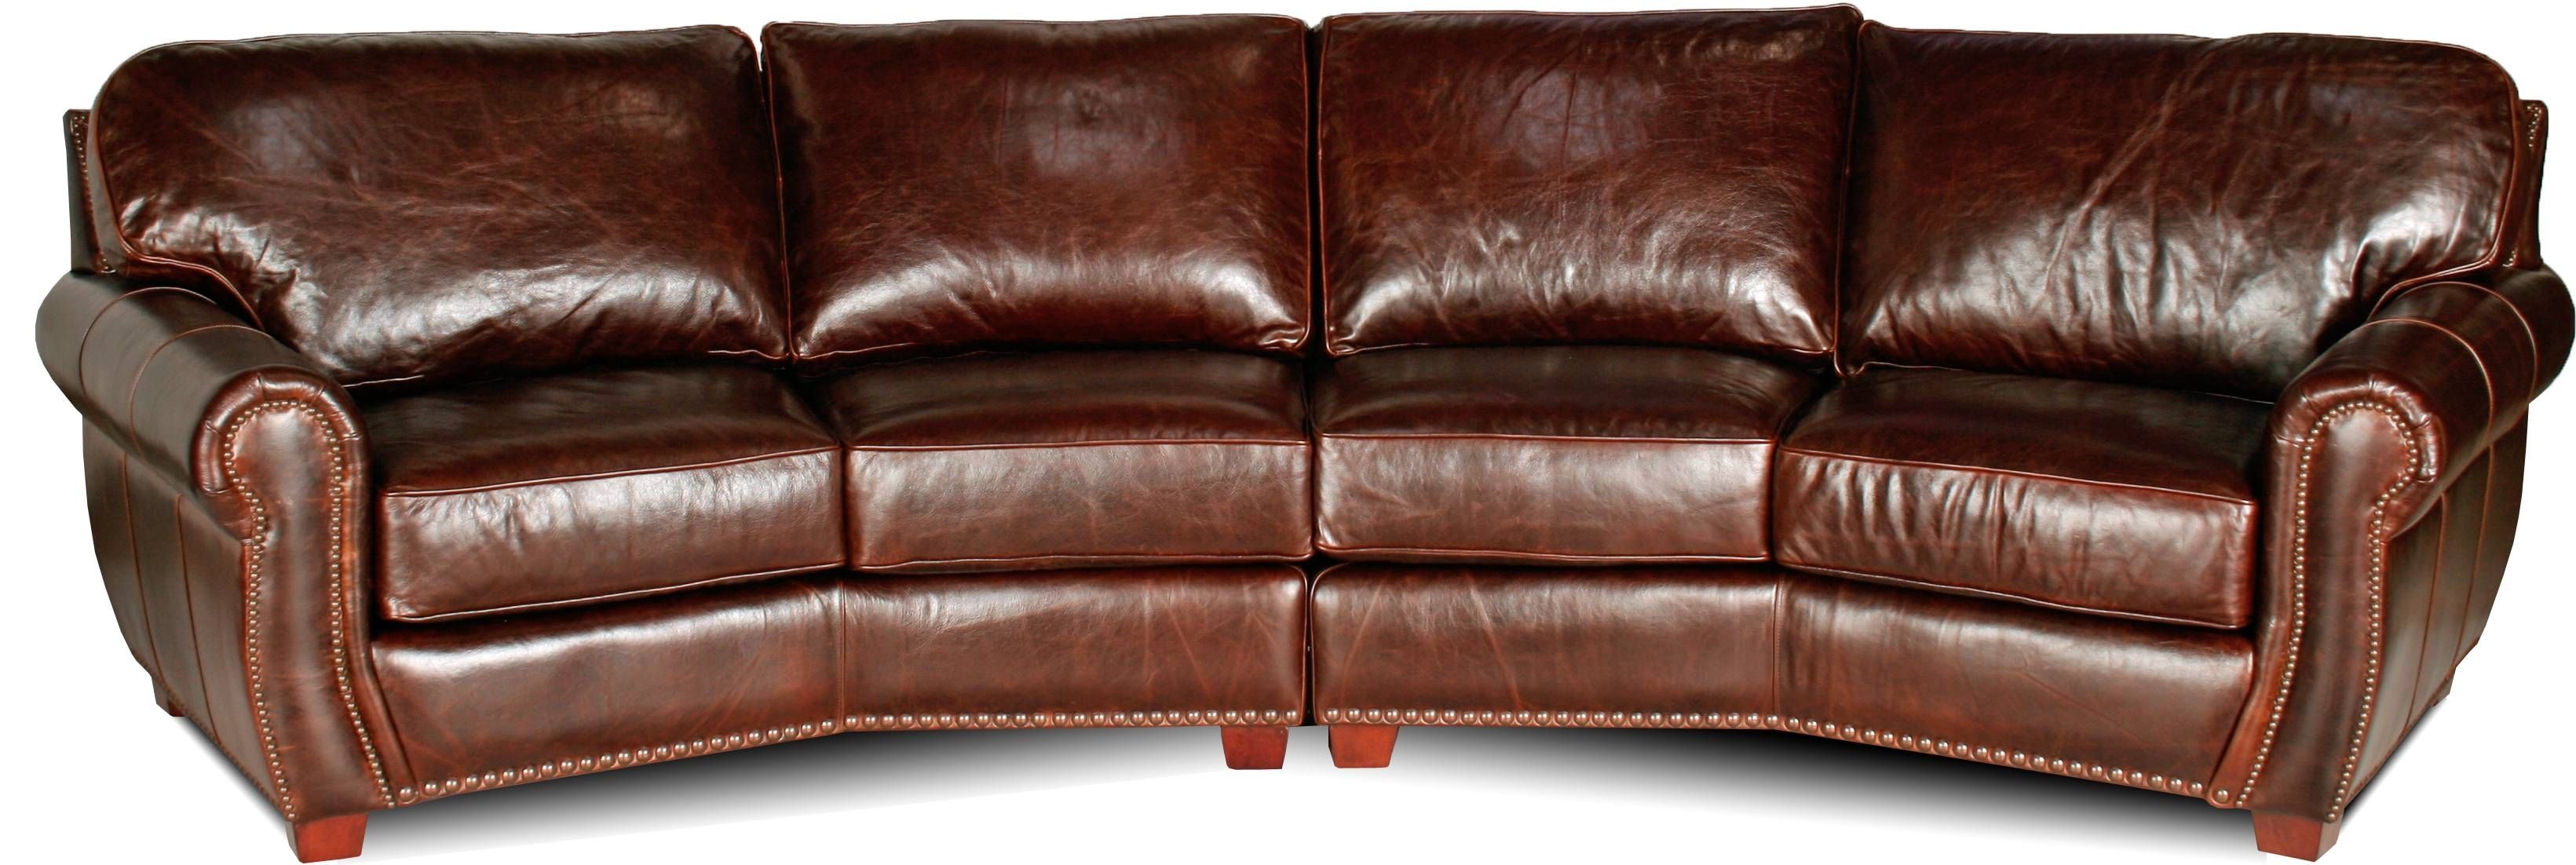 Berkshire Leather Furniture Pertaining To 4 Seat Leather Sofas (View 3 of 15)